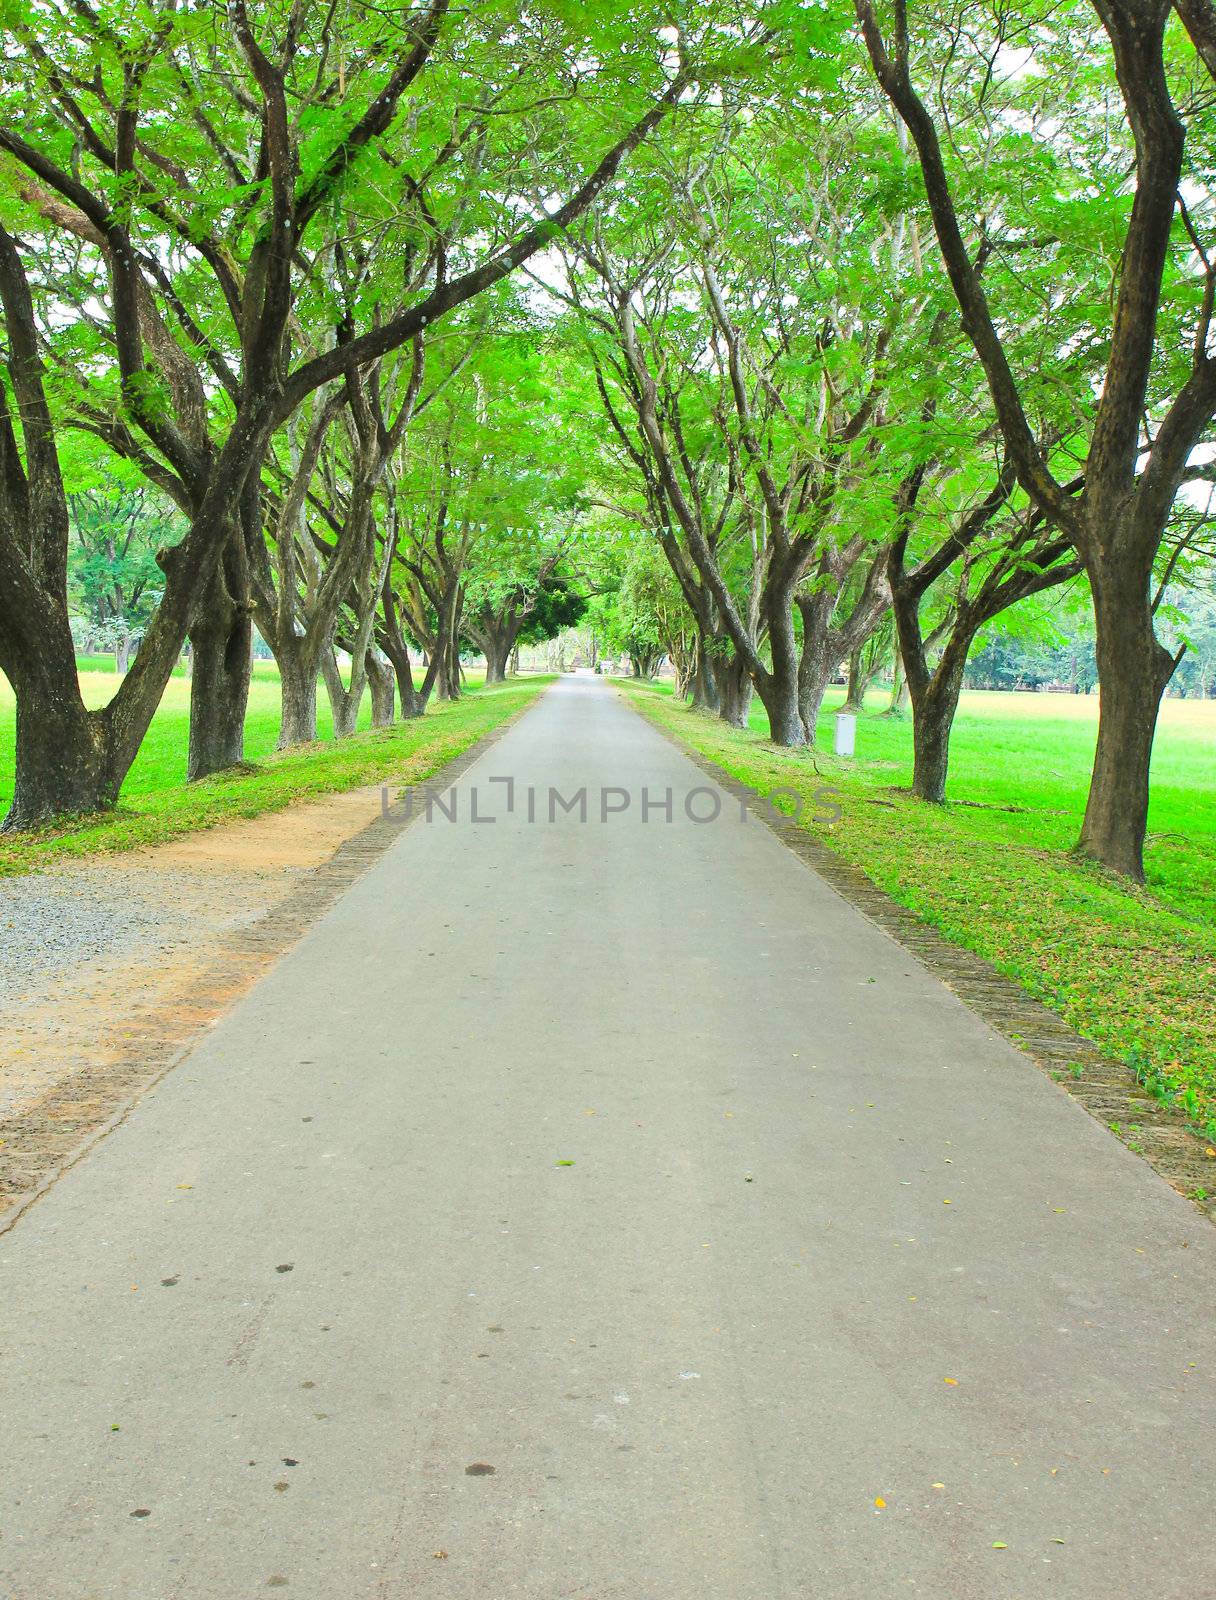 Road through row of green trees